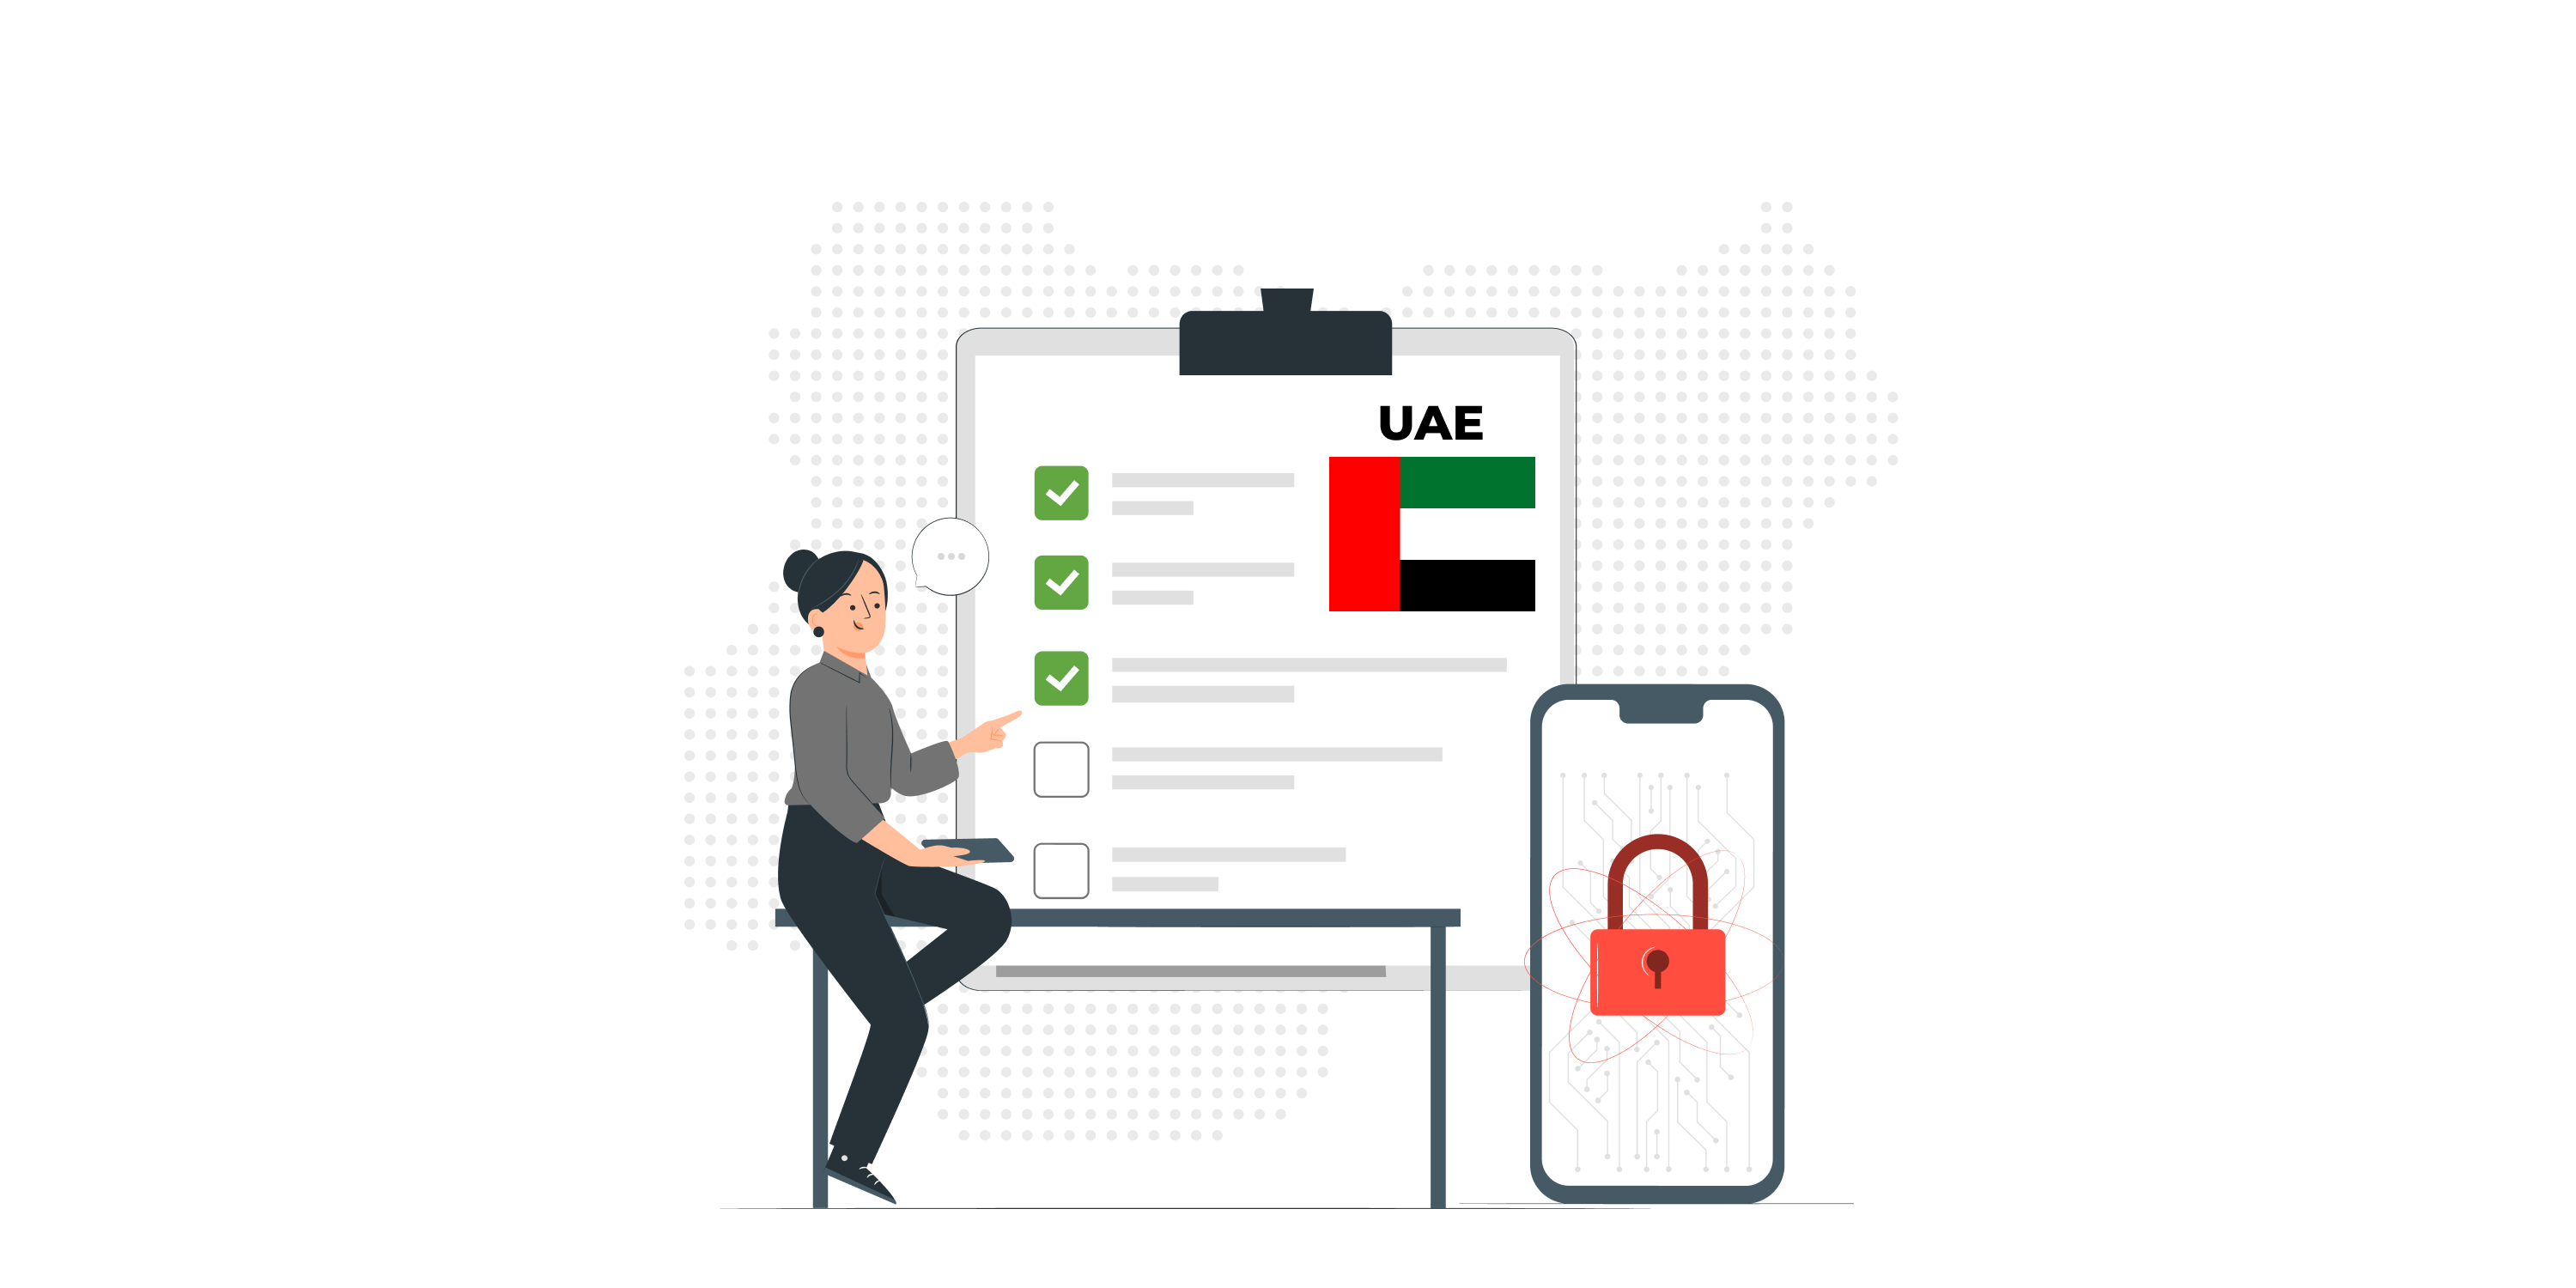 Ultimate Security Checklist to Launch a Mobile App in UAE - iOS & Android